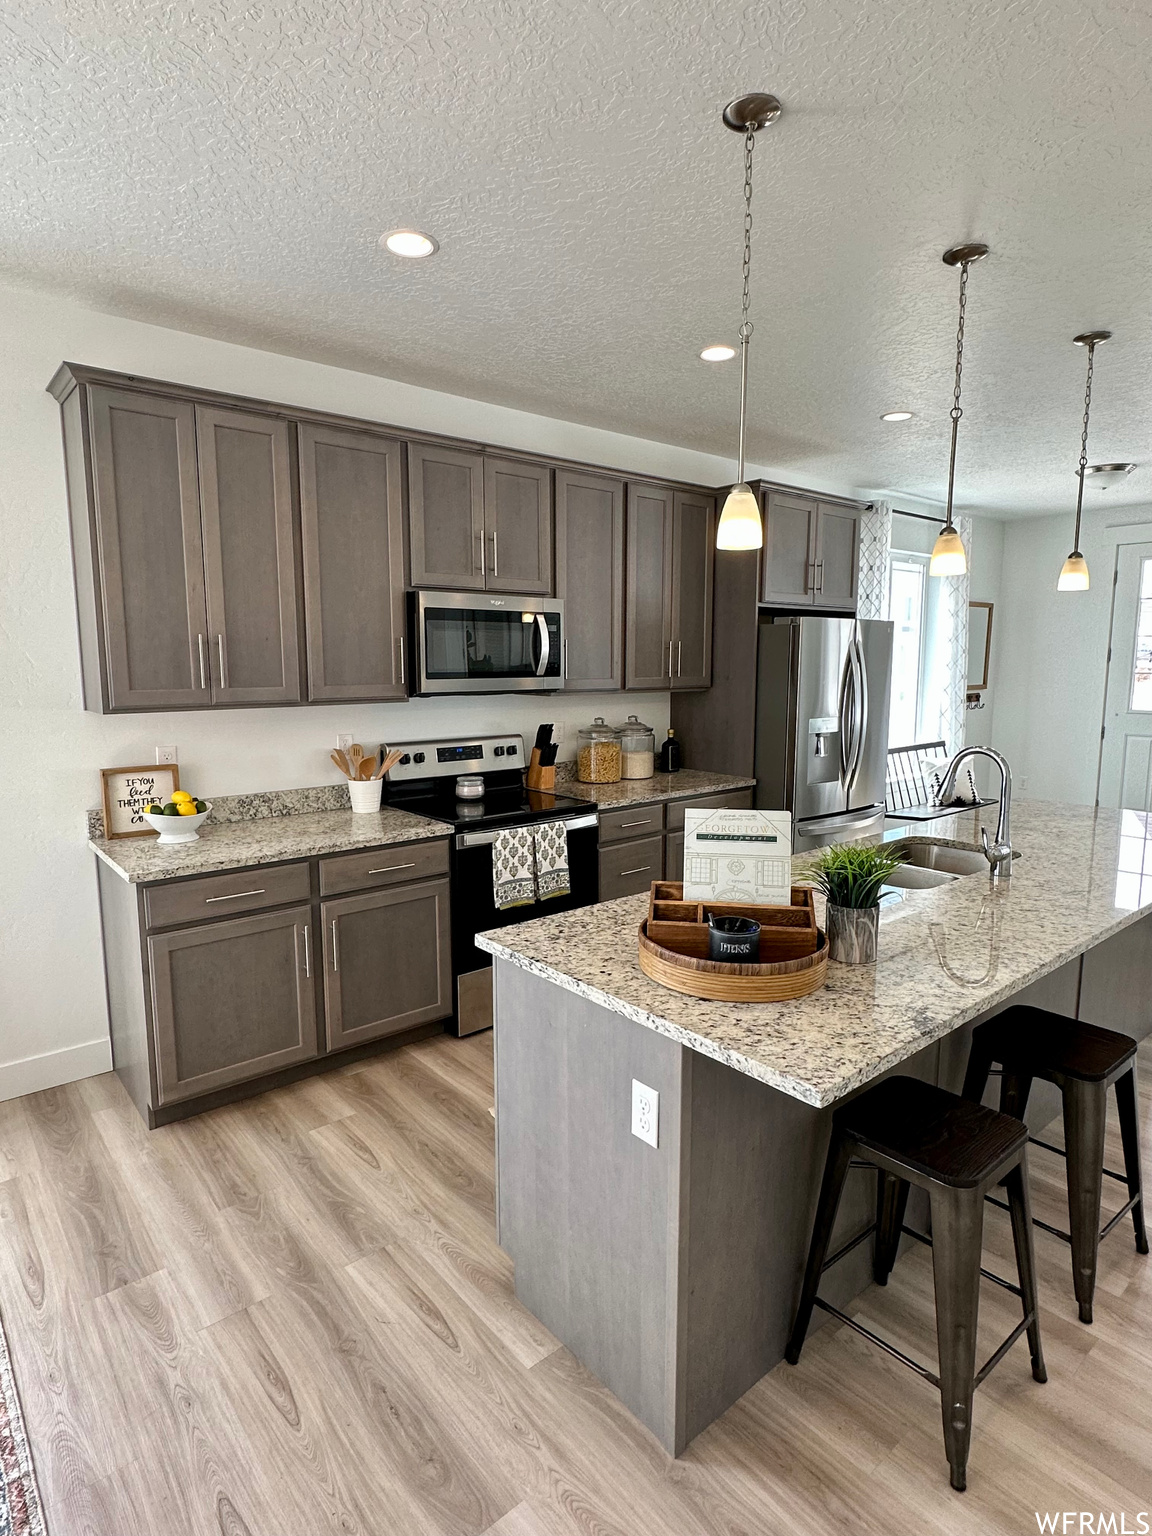 Kitchen with hanging light fixtures, light hardwood / wood-style floors, appliances with stainless steel finishes, a  large center island with sink.